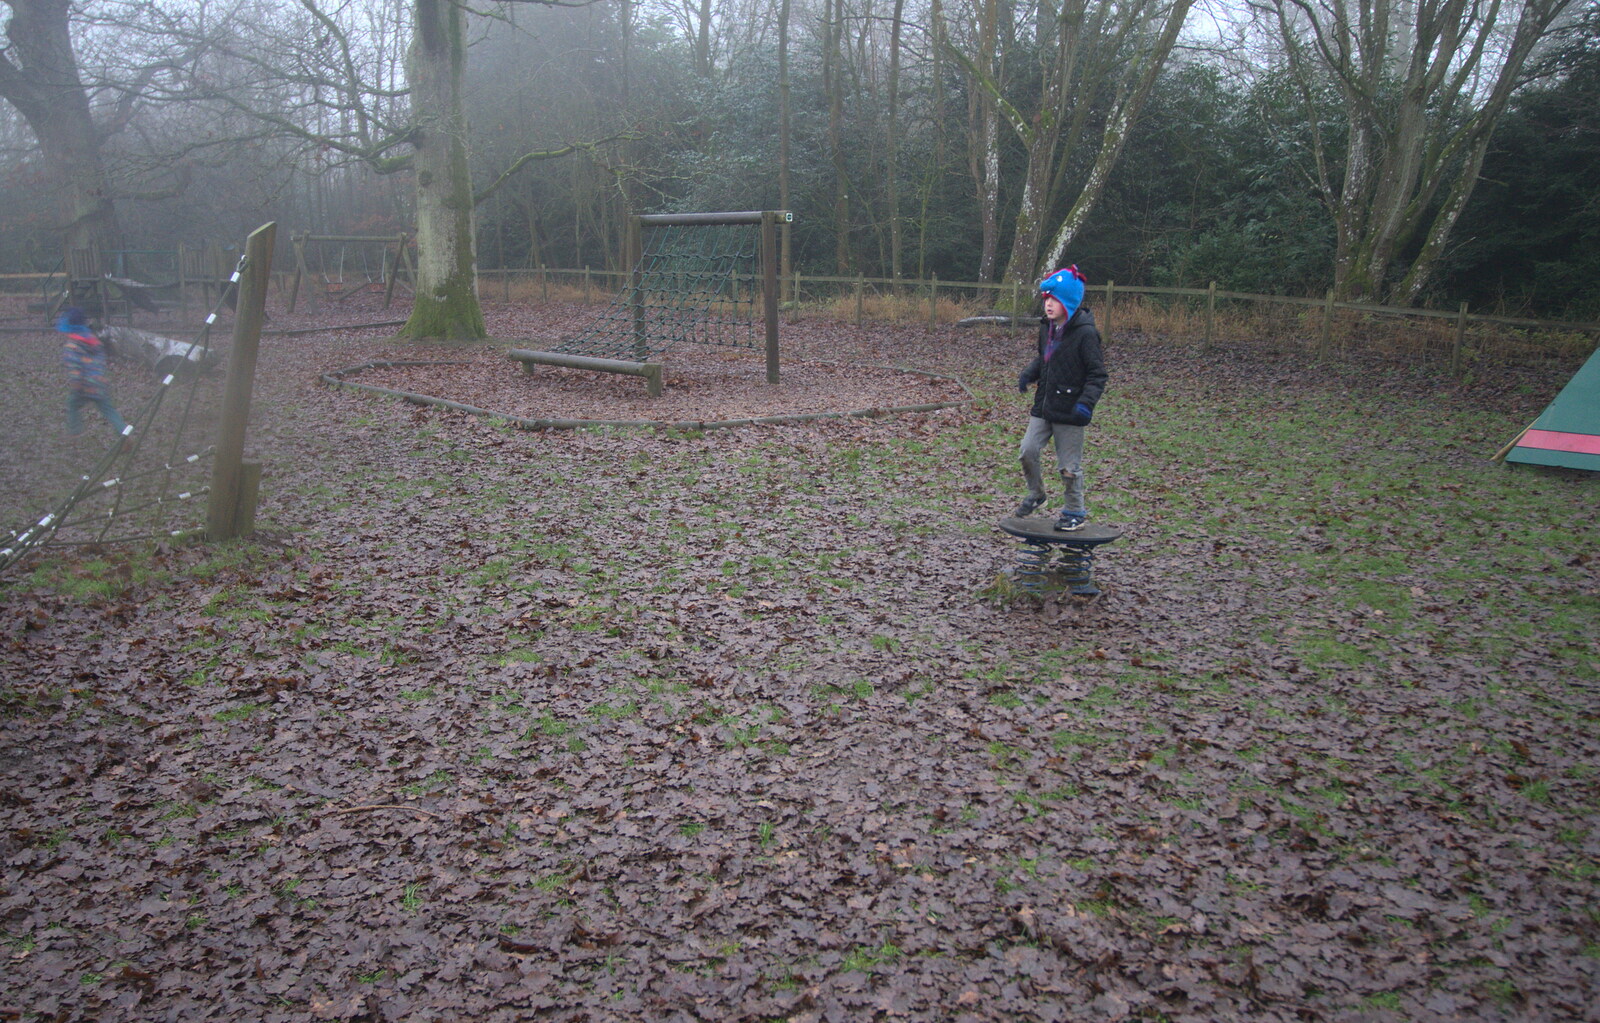 The playground is a bit wet and leafy from A Trip to Ickworth House, Horringer, Suffolk - 30th December 2016